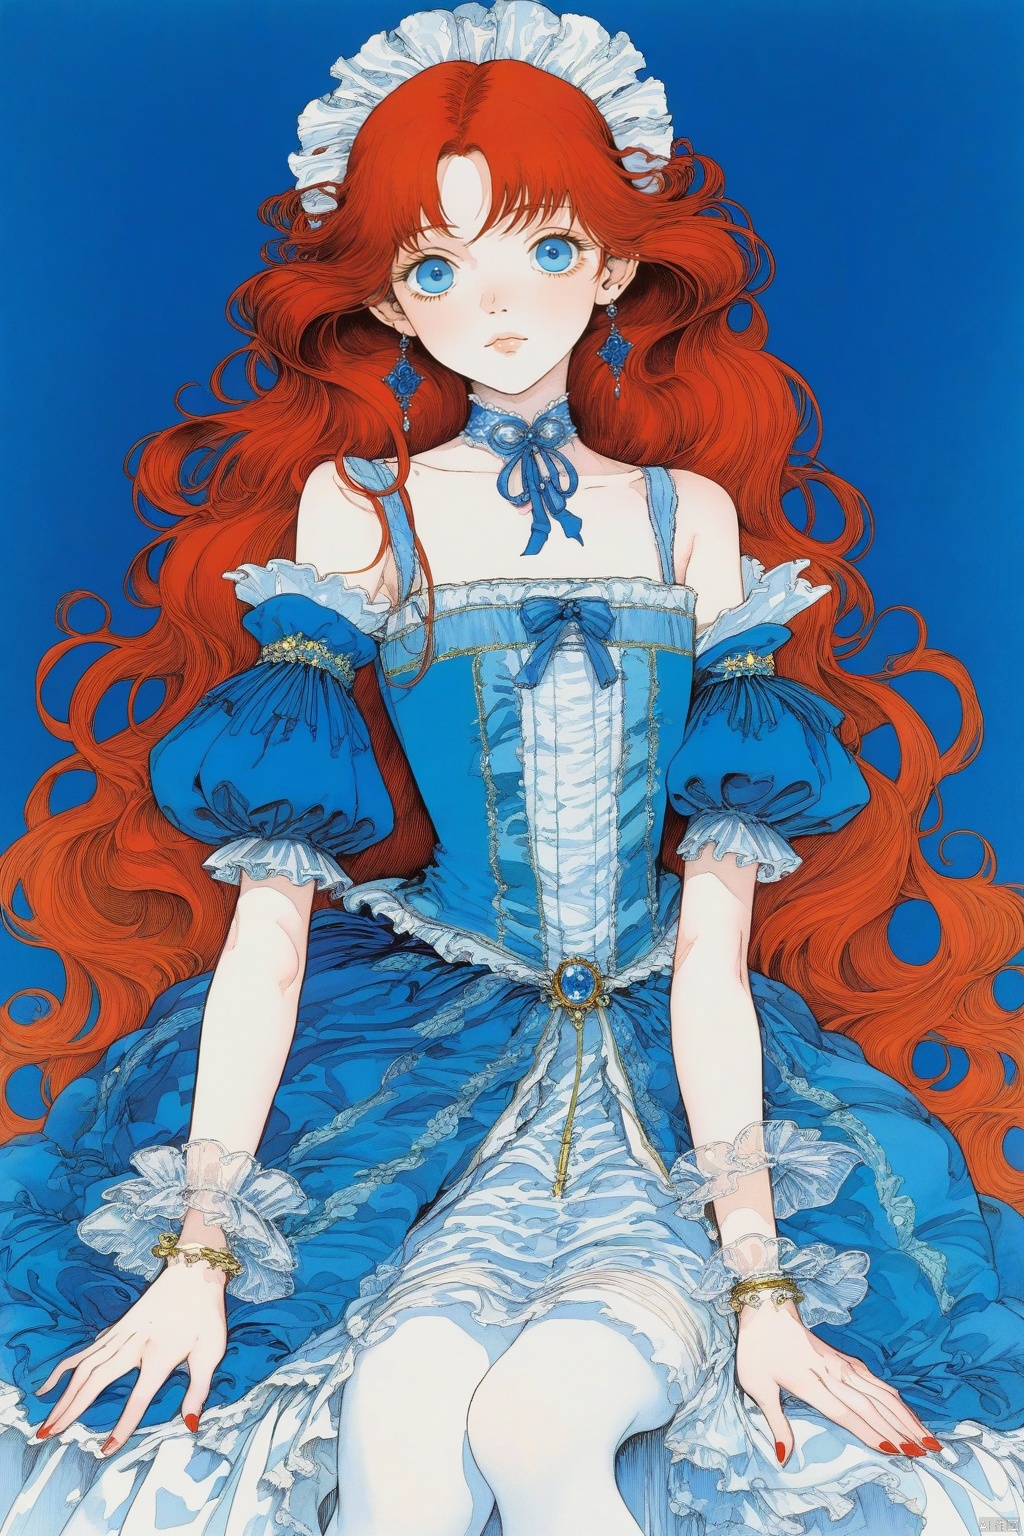  portrait, Long red hair, blue eyes, white skin, cute 12 year old skinny princess in a blue Rococo dress, artwork by Masamune Shirow.crazy colors